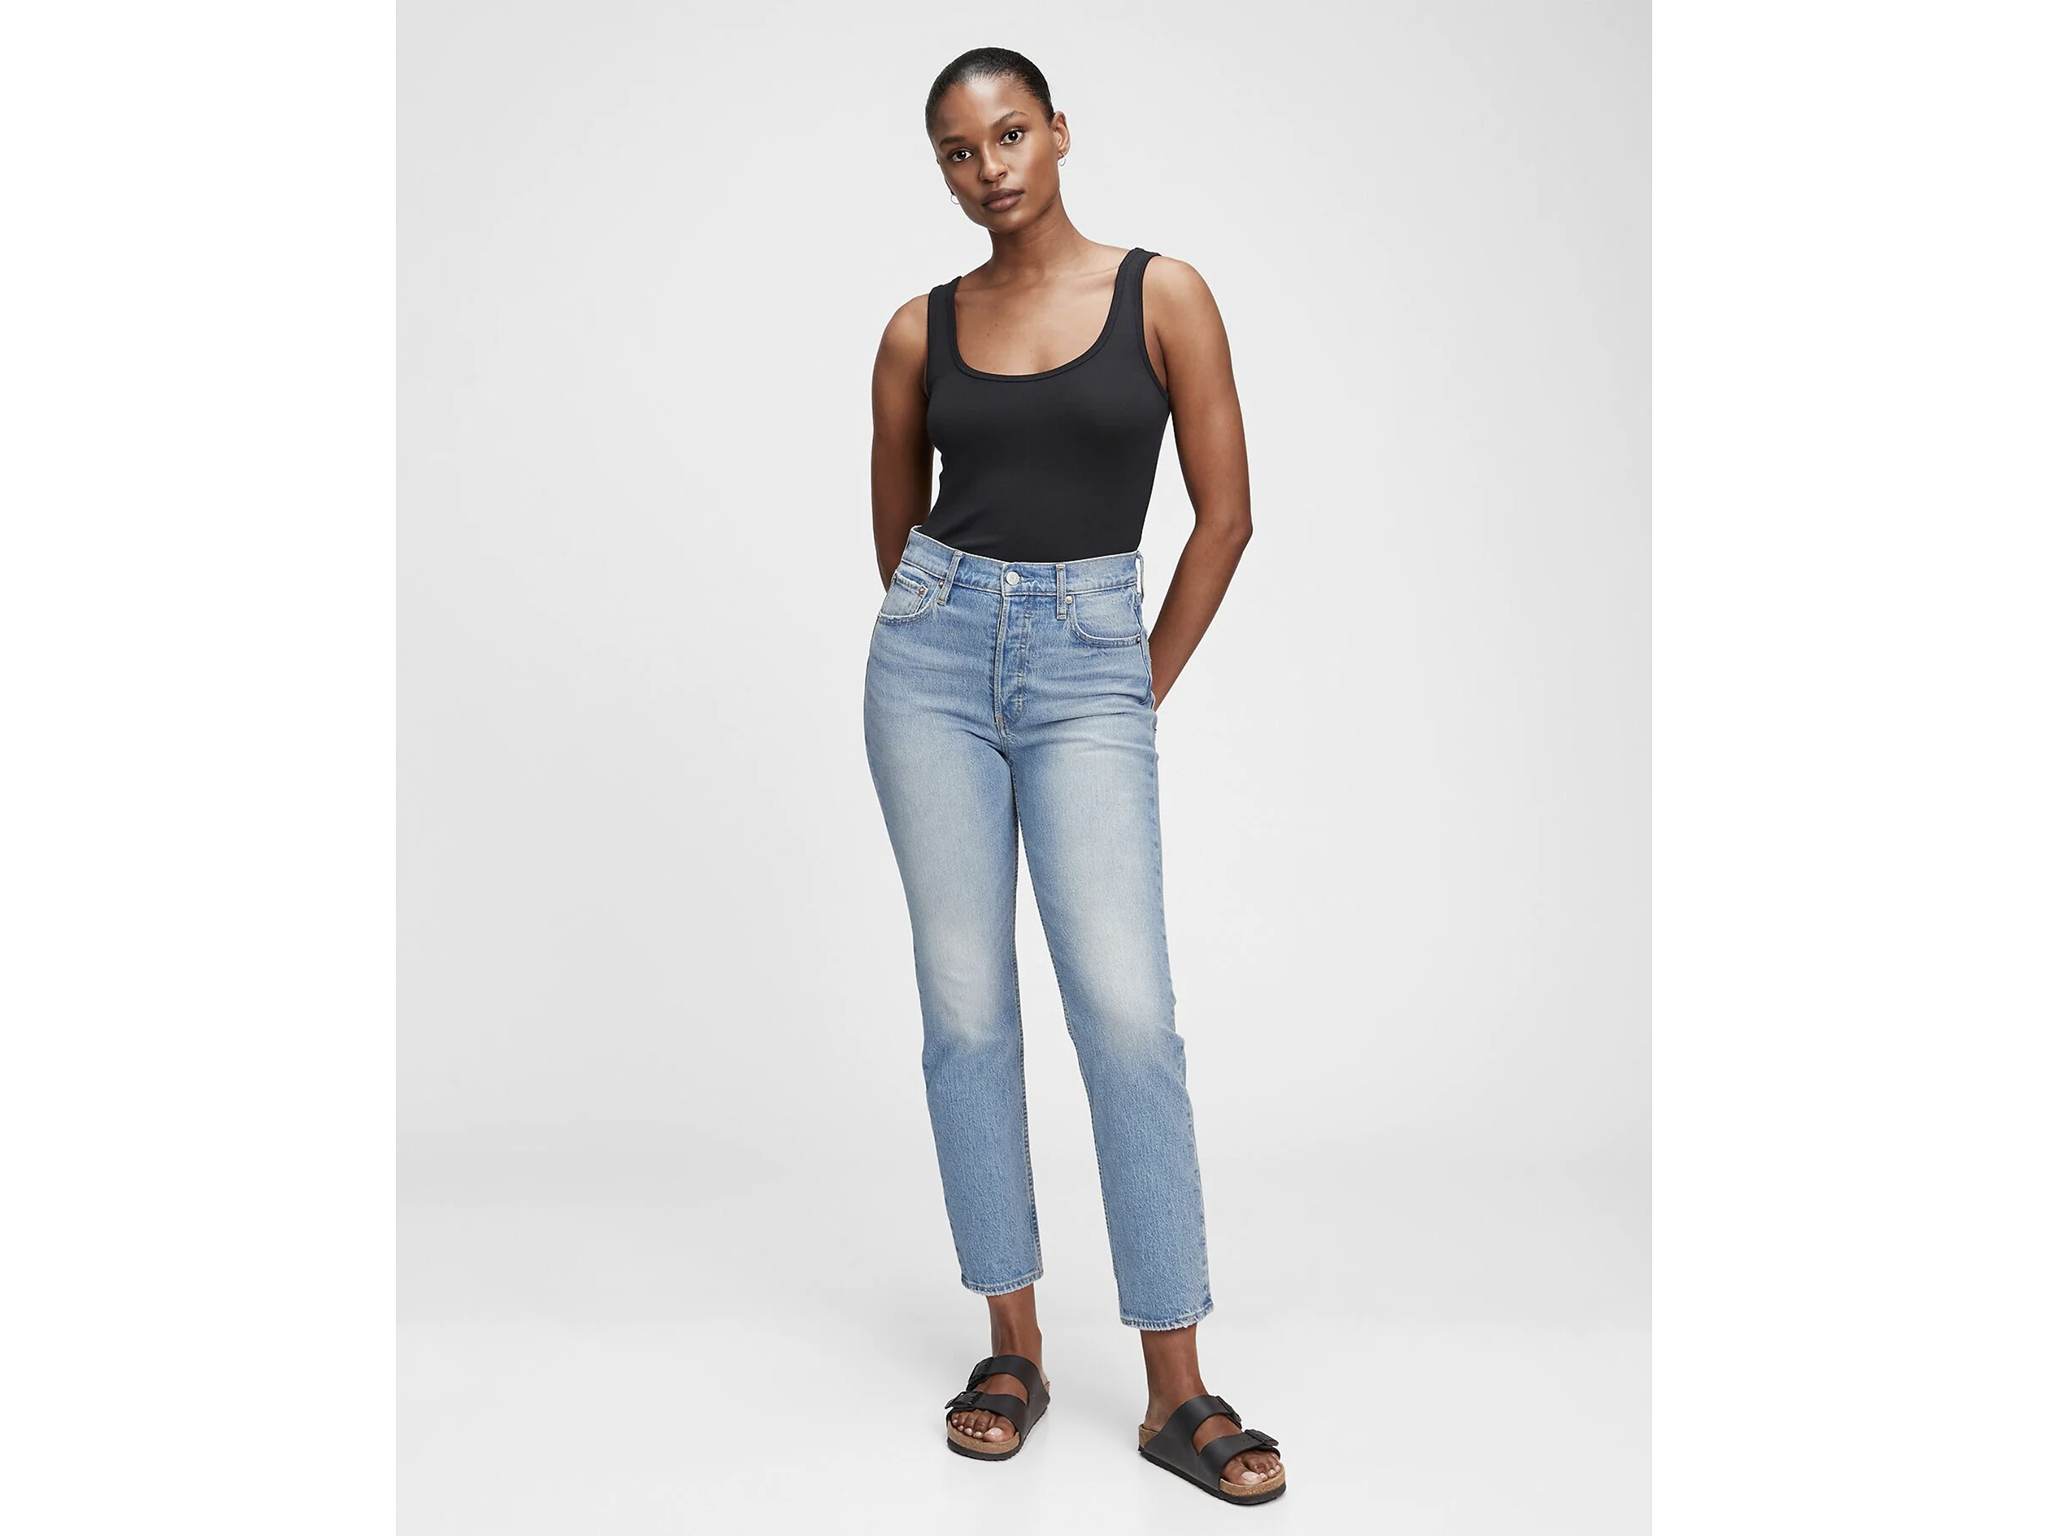 Gap high rise cheeky straight leg jeans: Was £49.95, now £34.96, Gap.co.uk